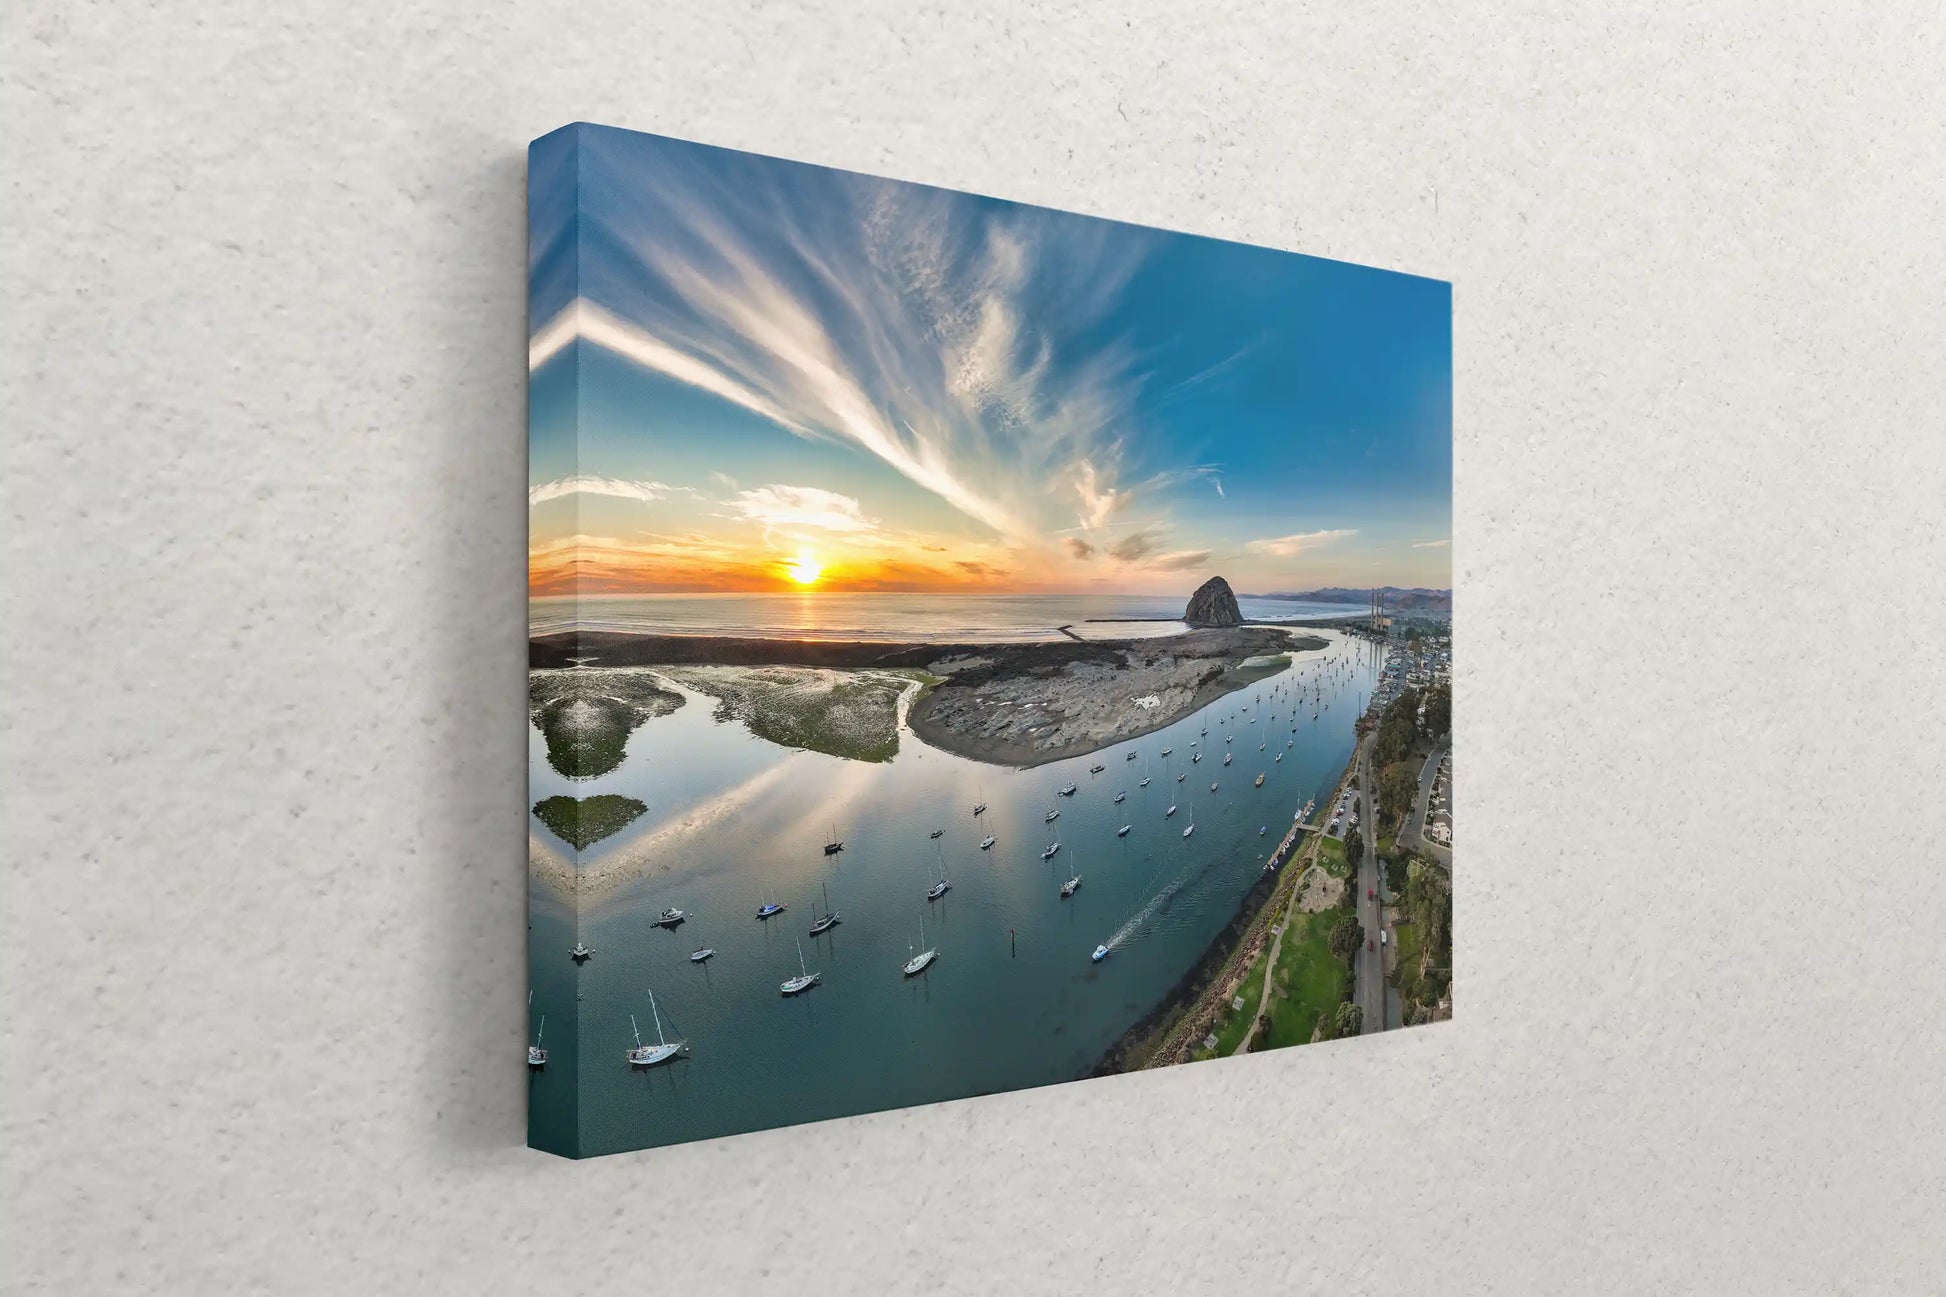 Detailed view of the back of a Morro Bay canvas print, highlighting the sturdy frame and hanging hardware, ready for display in any ocean lover's space.